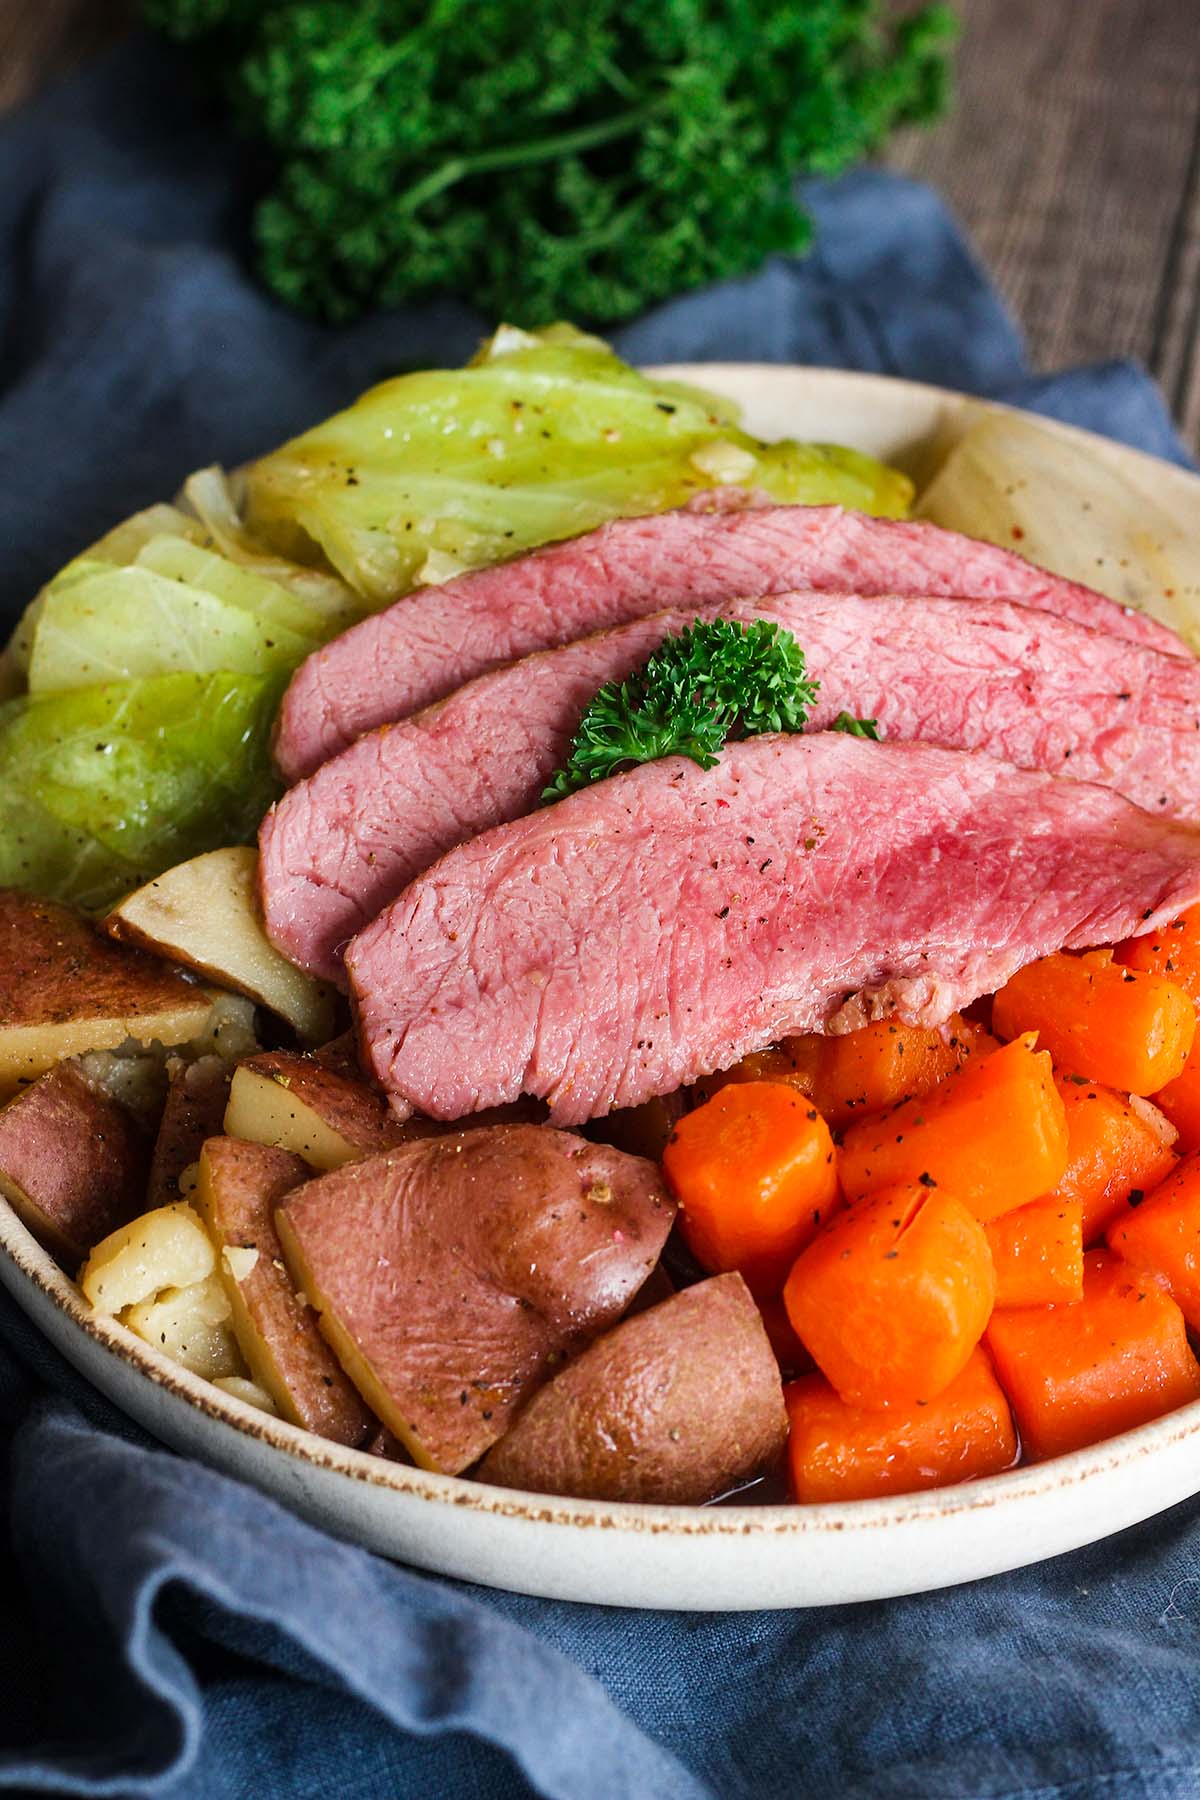 Three slices of corned beef atop cooked veggies in a bowl with a bunch of parsley and a blue kitchen towel.